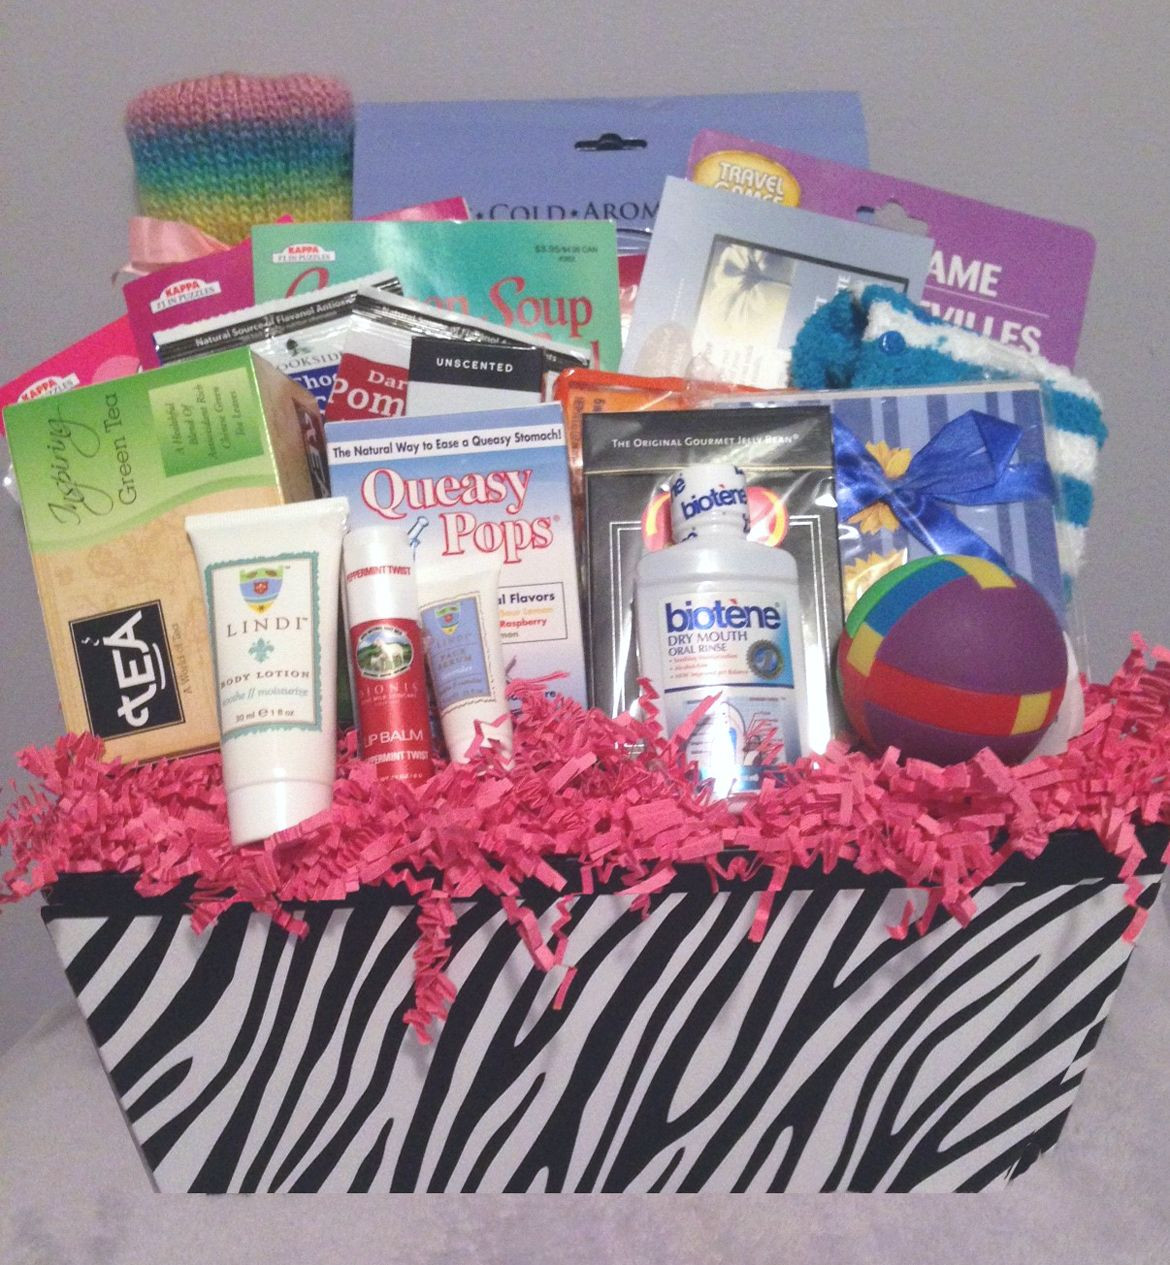 Gift Ideas Chemotherapy Patients
 Women s Chemo Basket